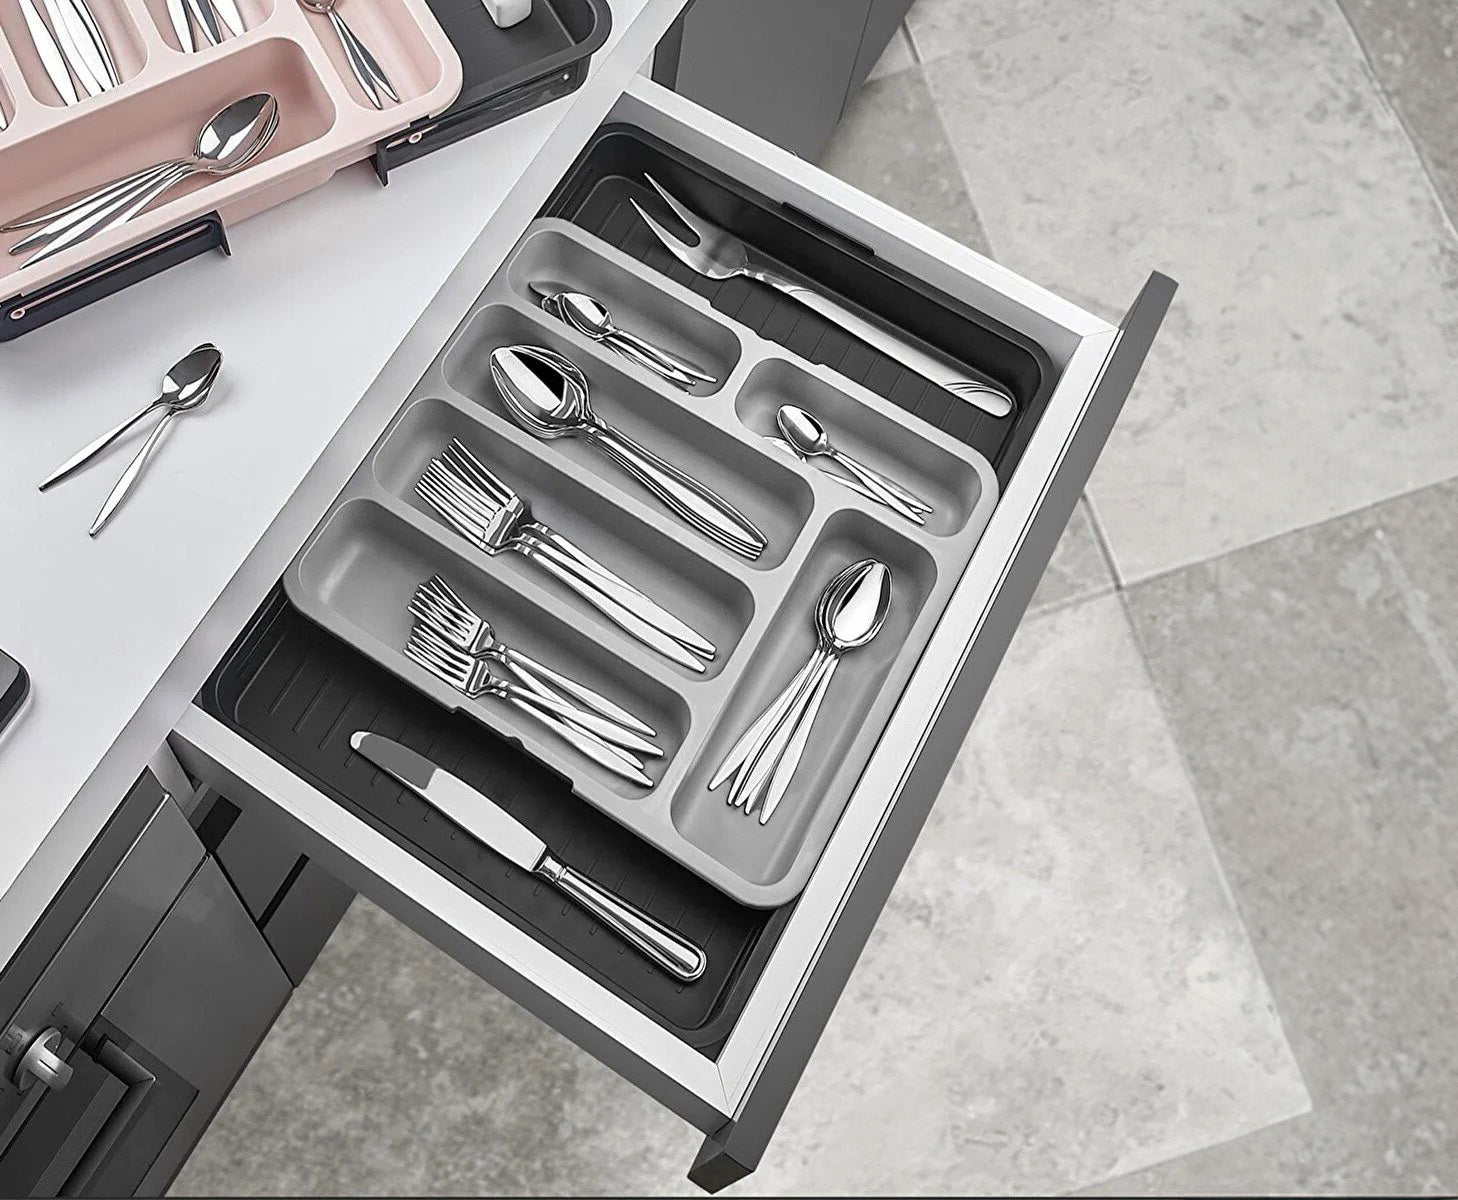 Furndiy Expandable Drawer Organizer Utensil Tray for Kitchen | Flatware and Cutlery Holder